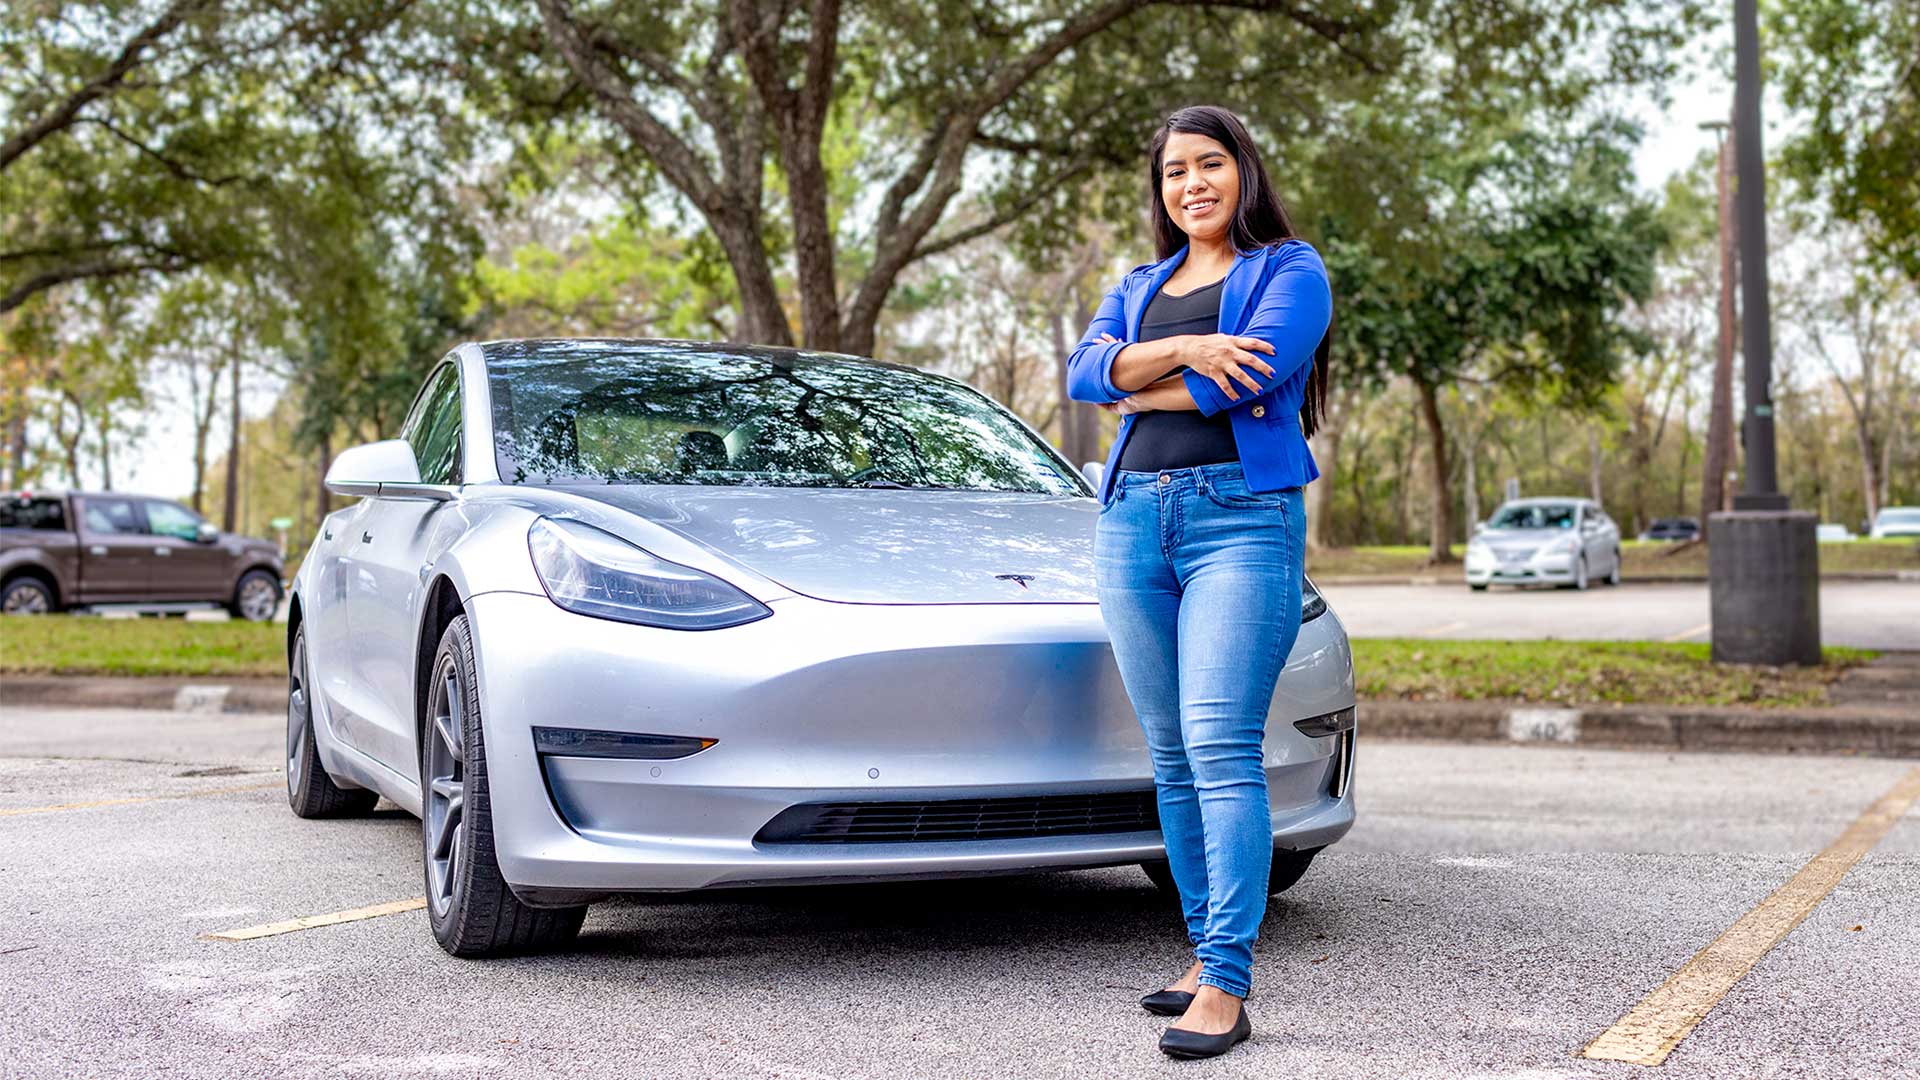 Tesla internship: 'Cleaner energy aligns with my values,' says UHCL student